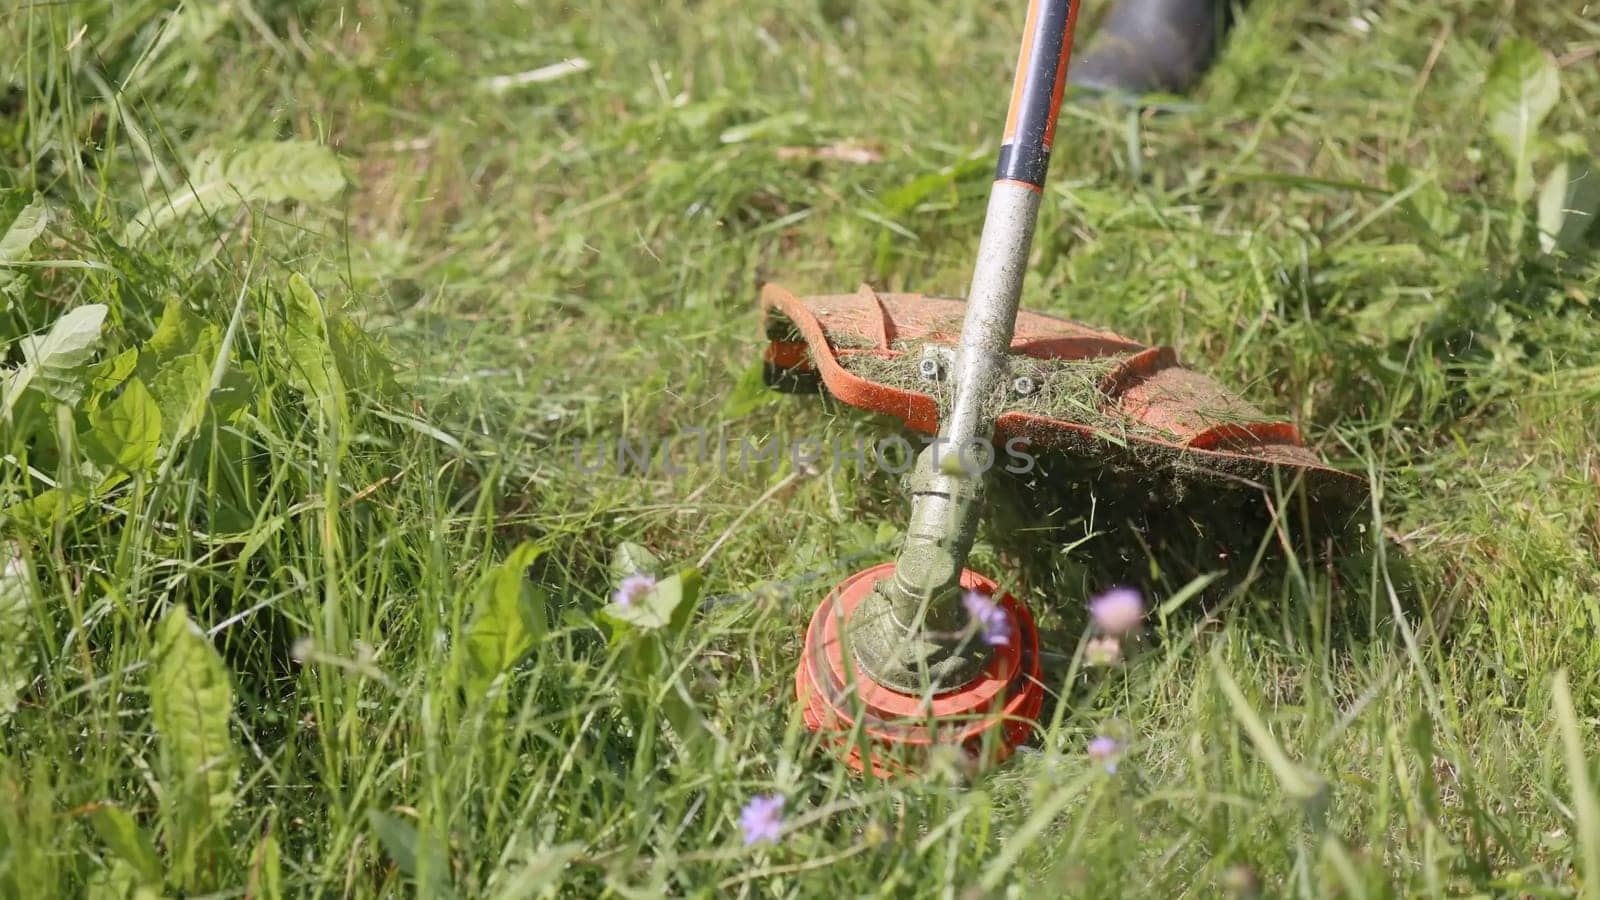 A man mows the grass with a trimmer on a summer day. by DovidPro